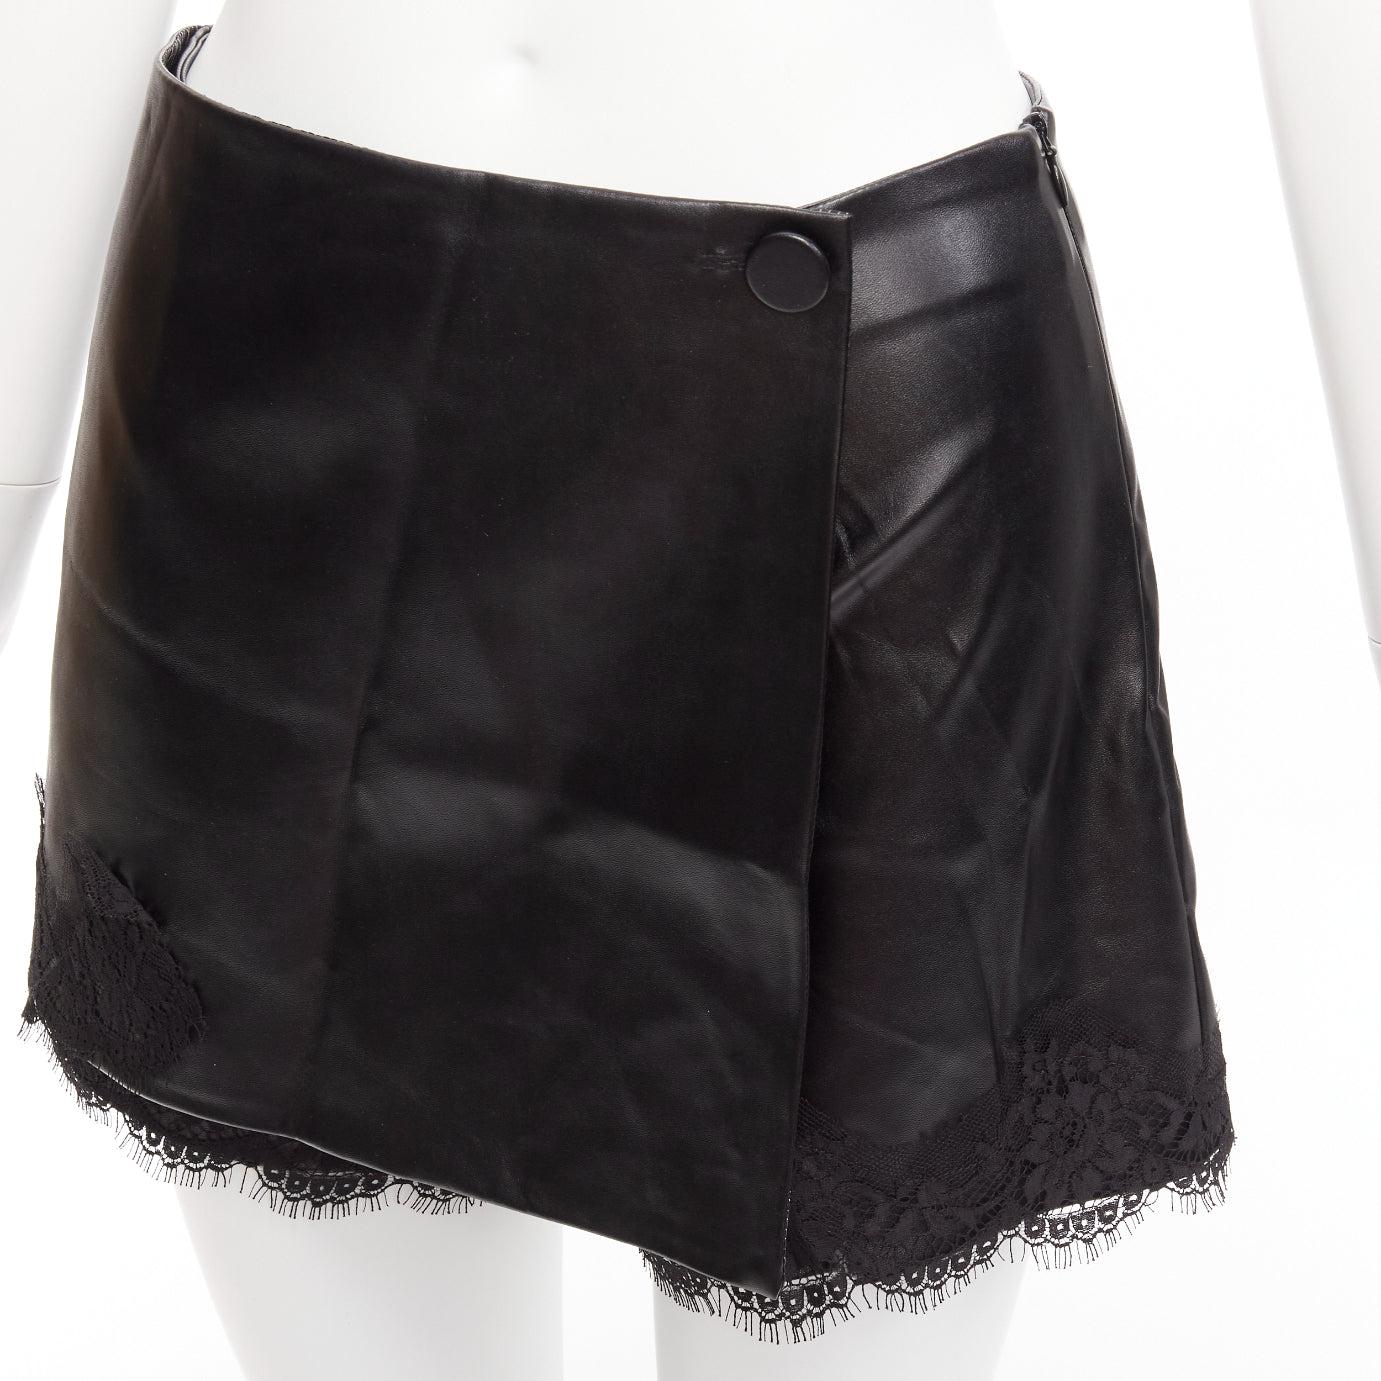 ERMANNO SCERVINO black vegan leather wrap skort lace trim shorts IT38 XS
Reference: AAWC/A00864
Brand: Ermanno Scervino
Material: Polyester, Blend
Color: Black
Pattern: Lace
Closure: Zip
Lining: Black Fabric
Extra Details: Side zip.
Made in: